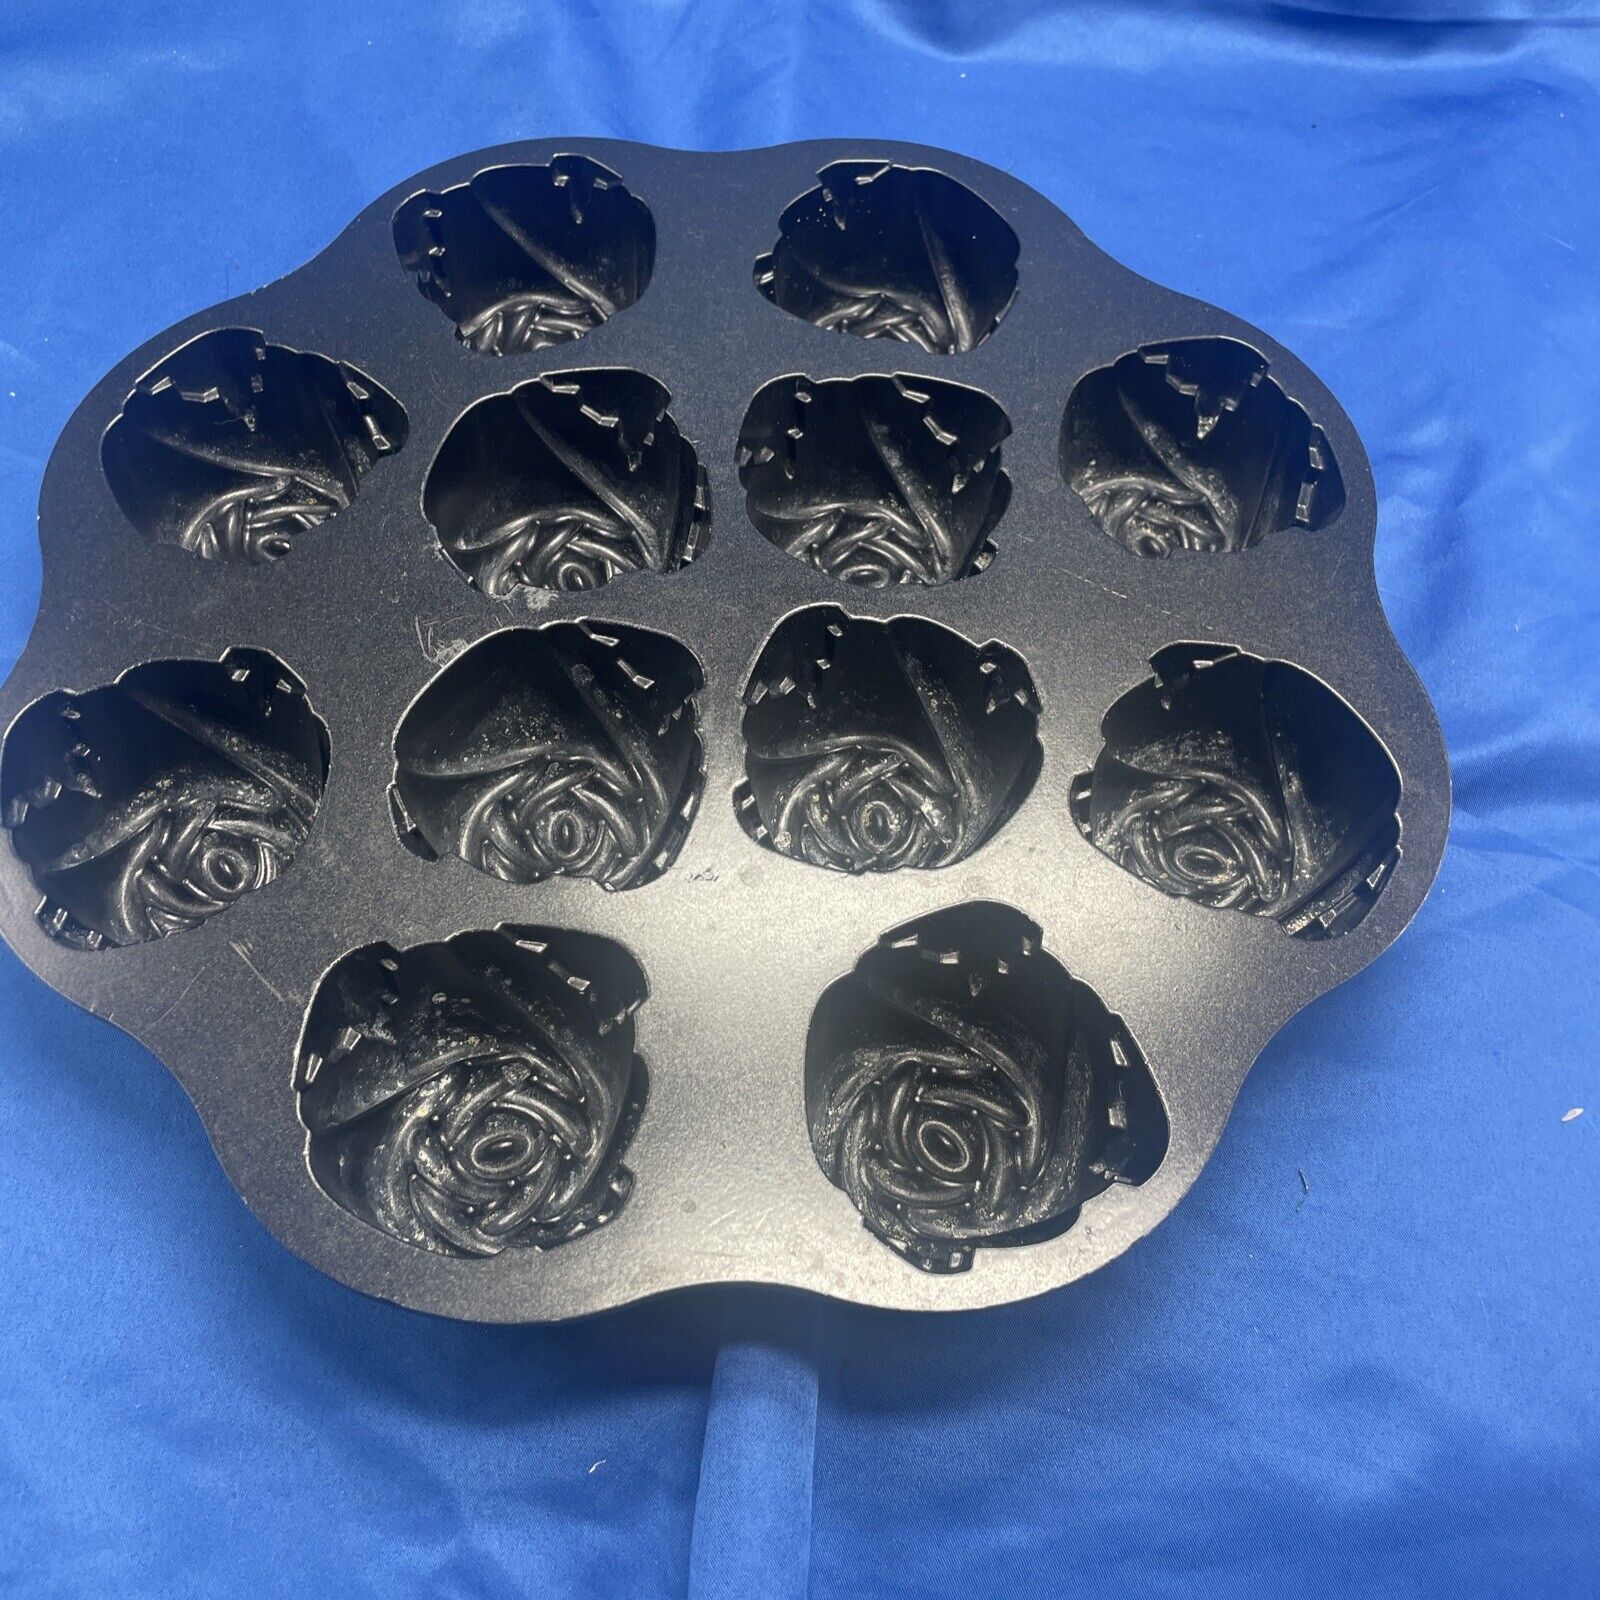 Nordic Ware Valentine Sweetheart Roses Cake Pan with a dozen roses